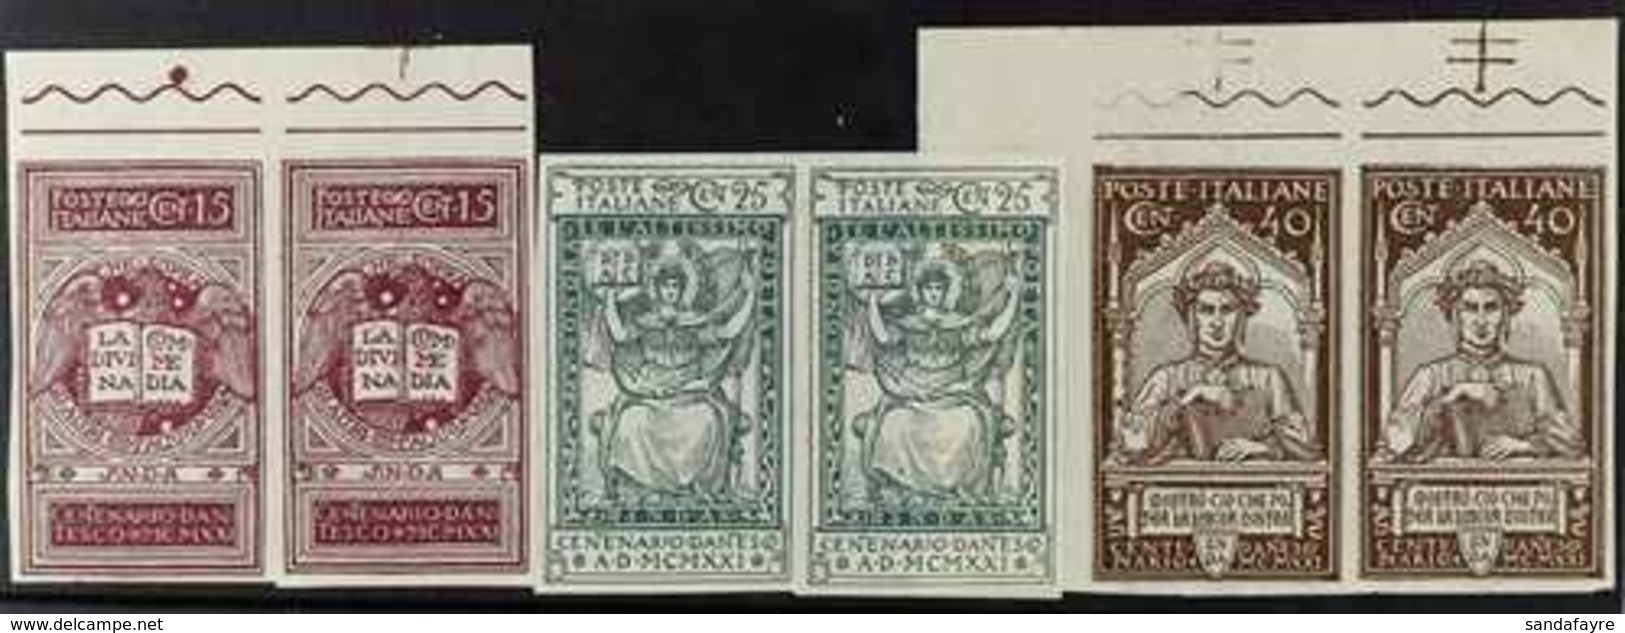 1921 Dante Anniversary Set In Very Fine Mint IMPERF PAIRS (Sass 116f/18f, Scott 133a/35a). Lovely! (3 Pairs) For More Im - Non Classés